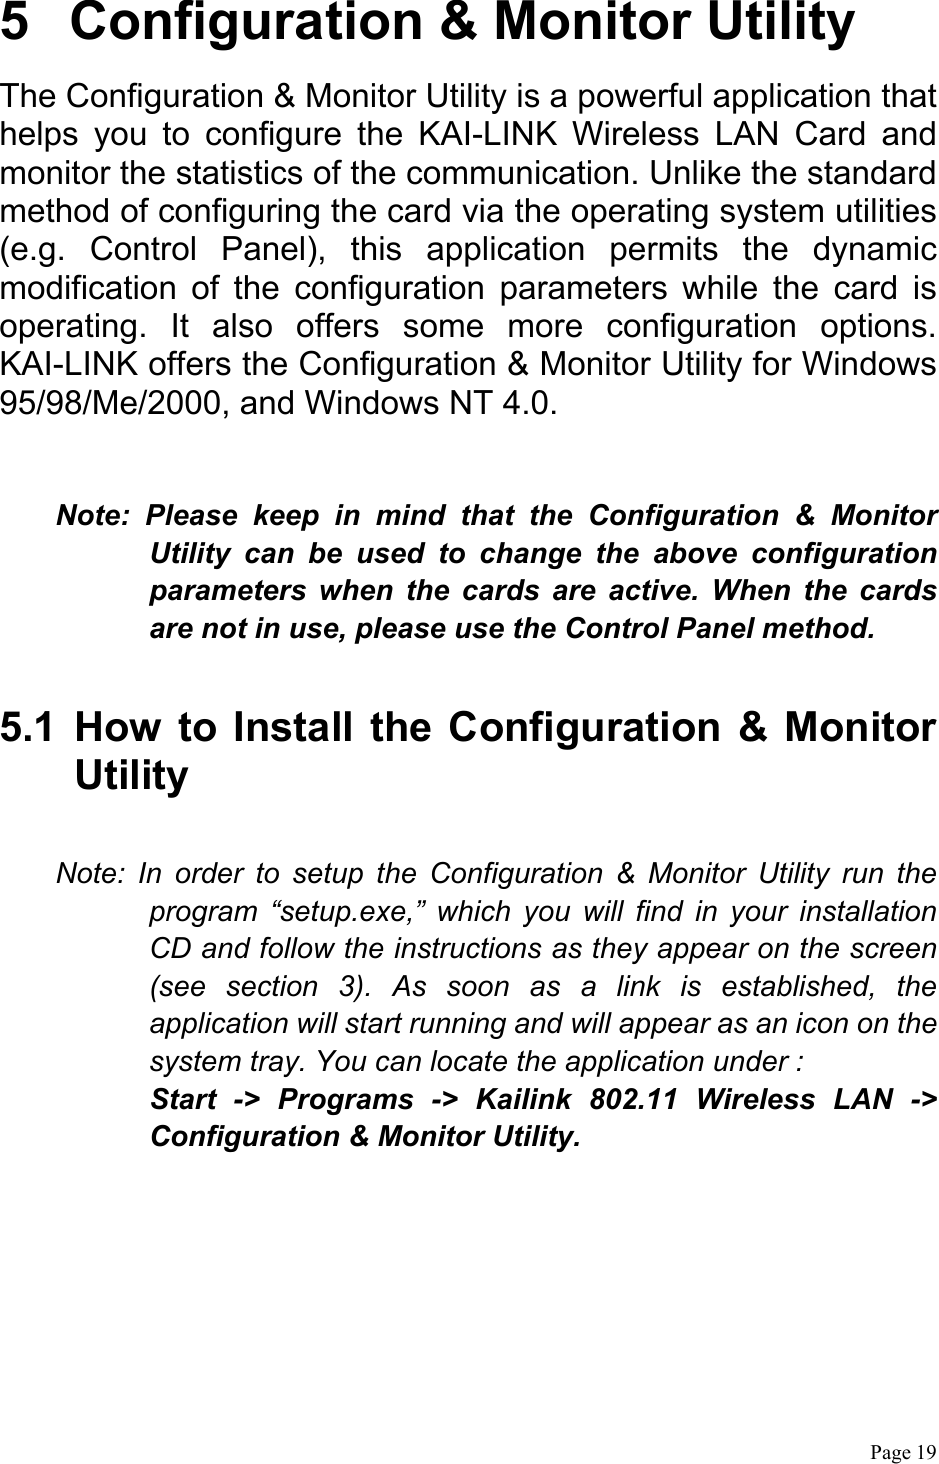  Page 19  5  Configuration &amp; Monitor Utility The Configuration &amp; Monitor Utility is a powerful application that helps you to configure the KAI-LINK Wireless LAN Card and monitor the statistics of the communication. Unlike the standard method of configuring the card via the operating system utilities (e.g. Control Panel), this application permits the dynamic modification of the configuration parameters while the card is operating. It also offers some more configuration options. KAI-LINK offers the Configuration &amp; Monitor Utility for Windows 95/98/Me/2000, and Windows NT 4.0.  Note: Please keep in mind that the Configuration &amp; Monitor Utility can be used to change the above configuration parameters when the cards are active. When the cards are not in use, please use the Control Panel method.  5.1 How to Install the Configuration &amp; Monitor Utility  Note: In order to setup the Configuration &amp; Monitor Utility run the program “setup.exe,” which you will find in your installation CD and follow the instructions as they appear on the screen (see section 3). As soon as a link is established, the application will start running and will appear as an icon on the system tray. You can locate the application under : Start -&gt; Programs -&gt; Kailink 802.11 Wireless LAN -&gt; Configuration &amp; Monitor Utility. 